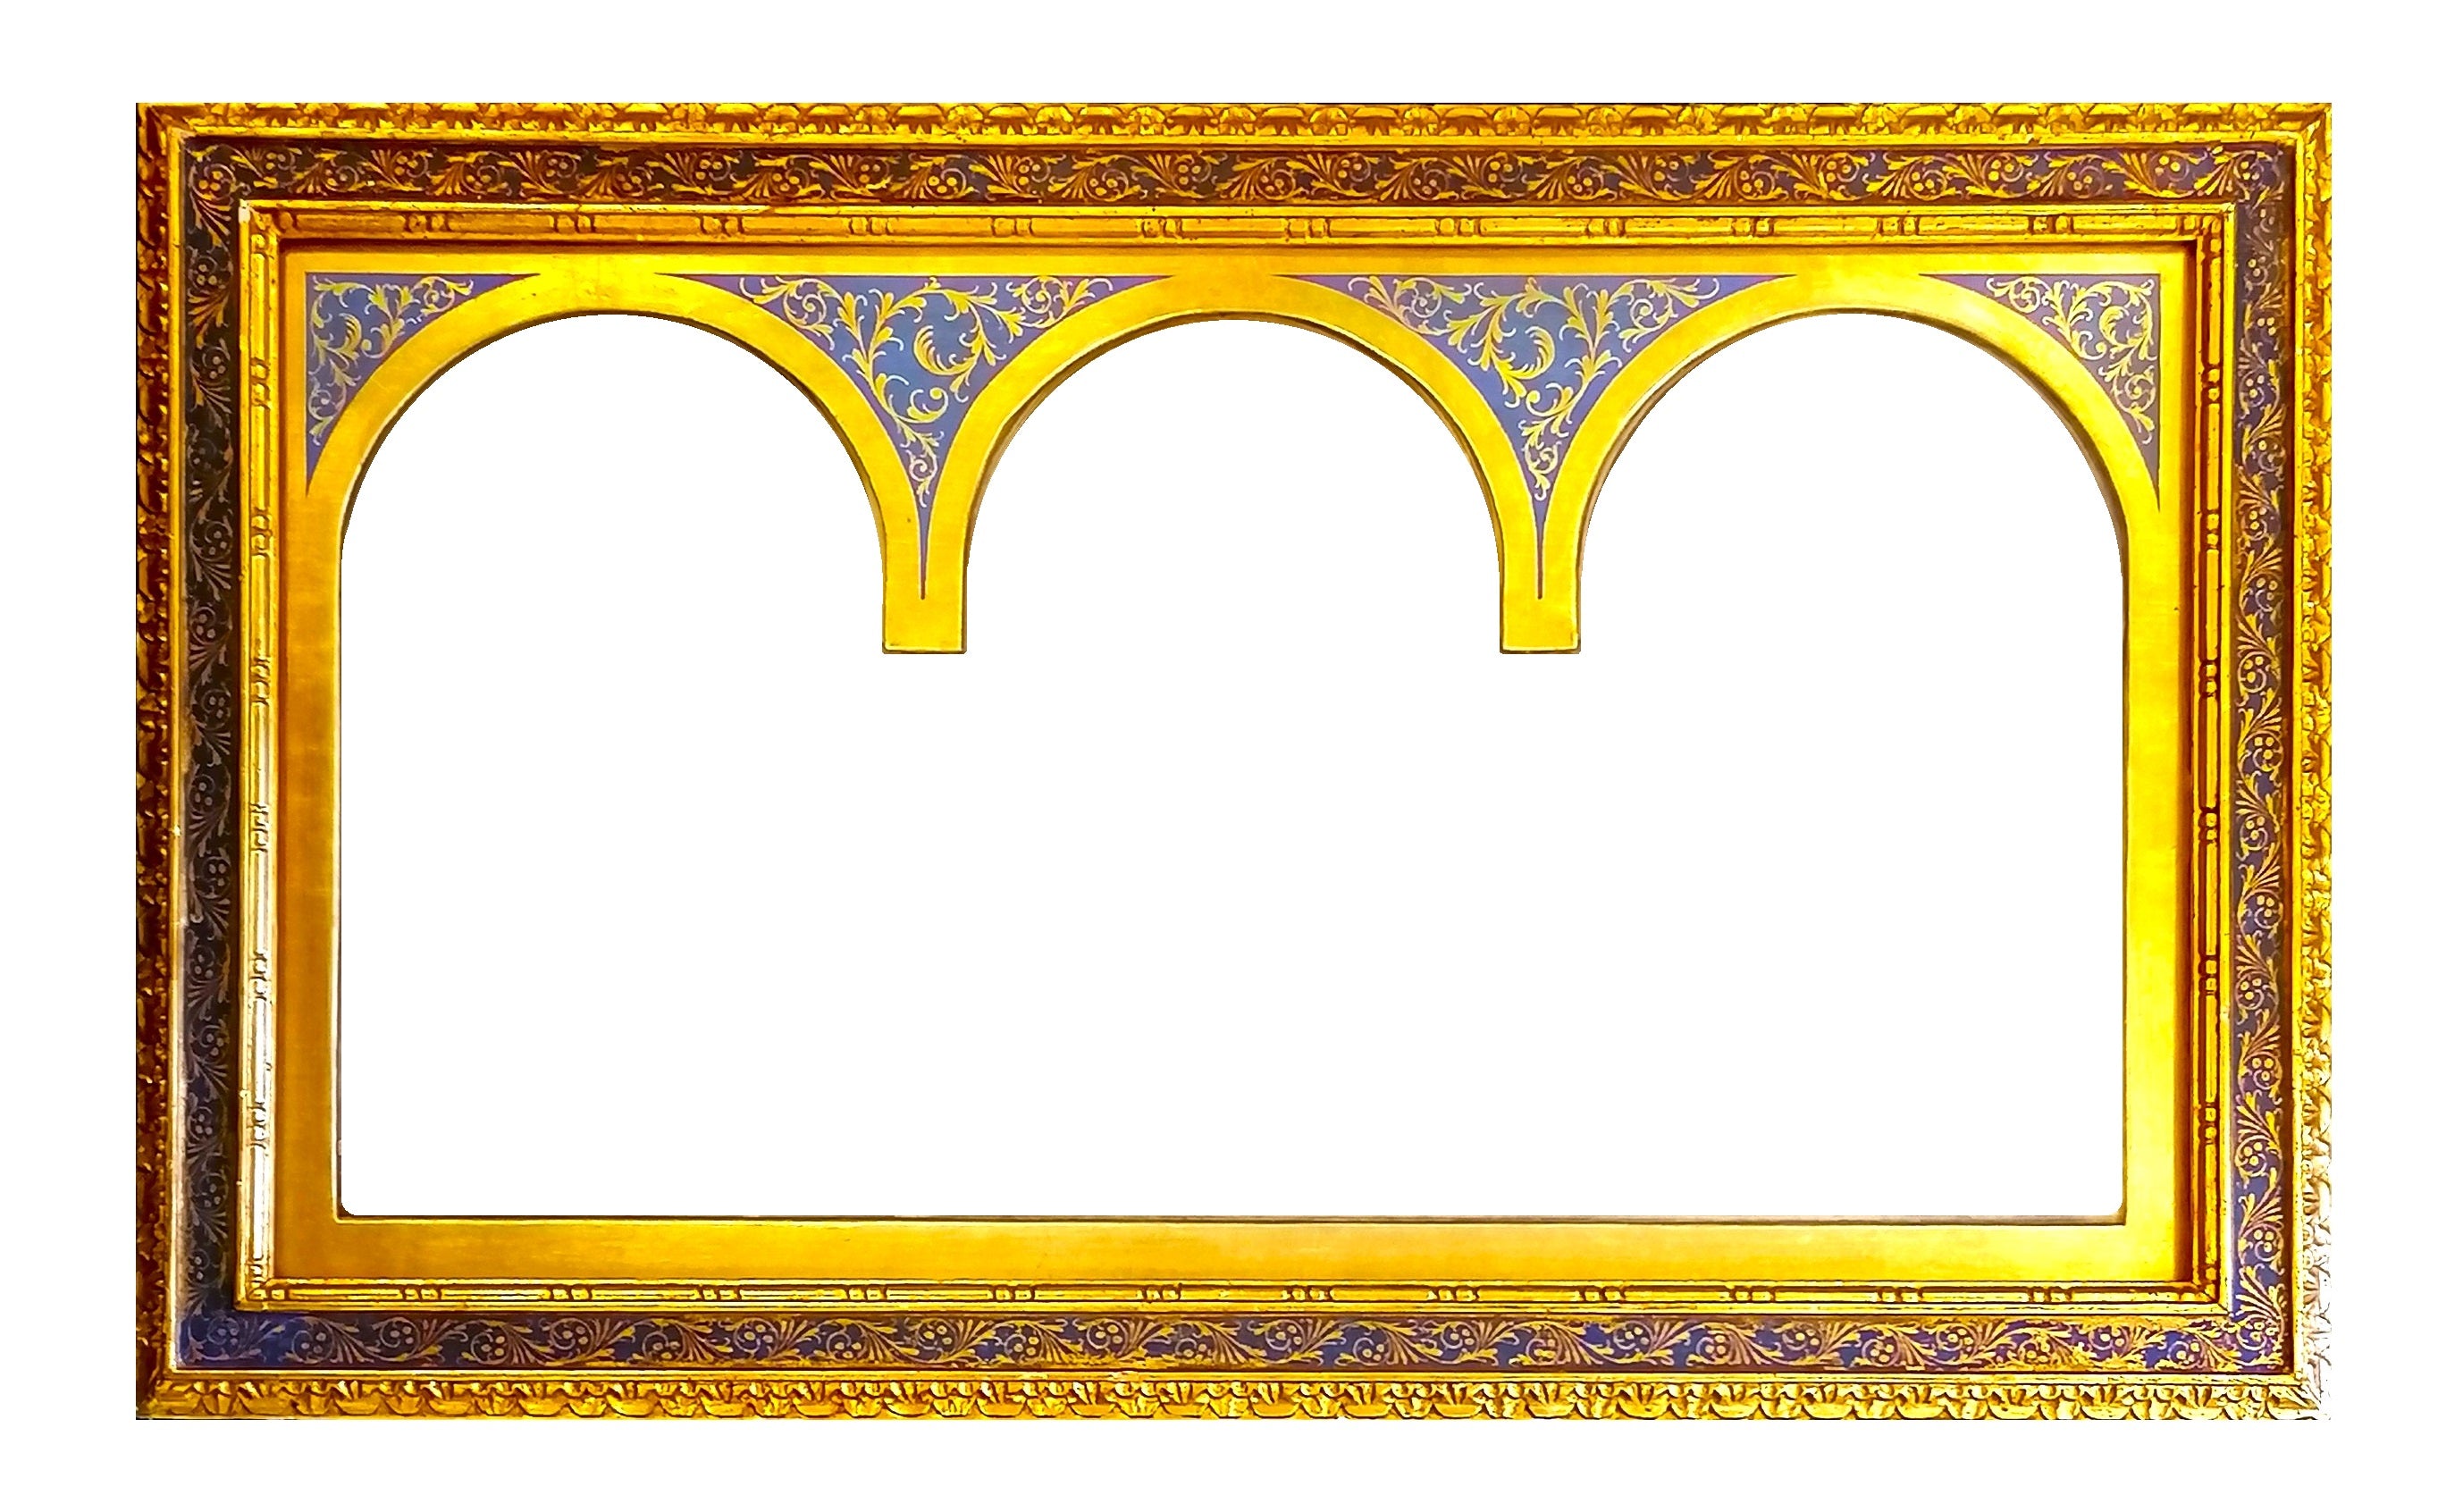 RARE ANTIQUE 19TH CENTURY TRIPTYCH-STYLE GILT PICTURE FRAME